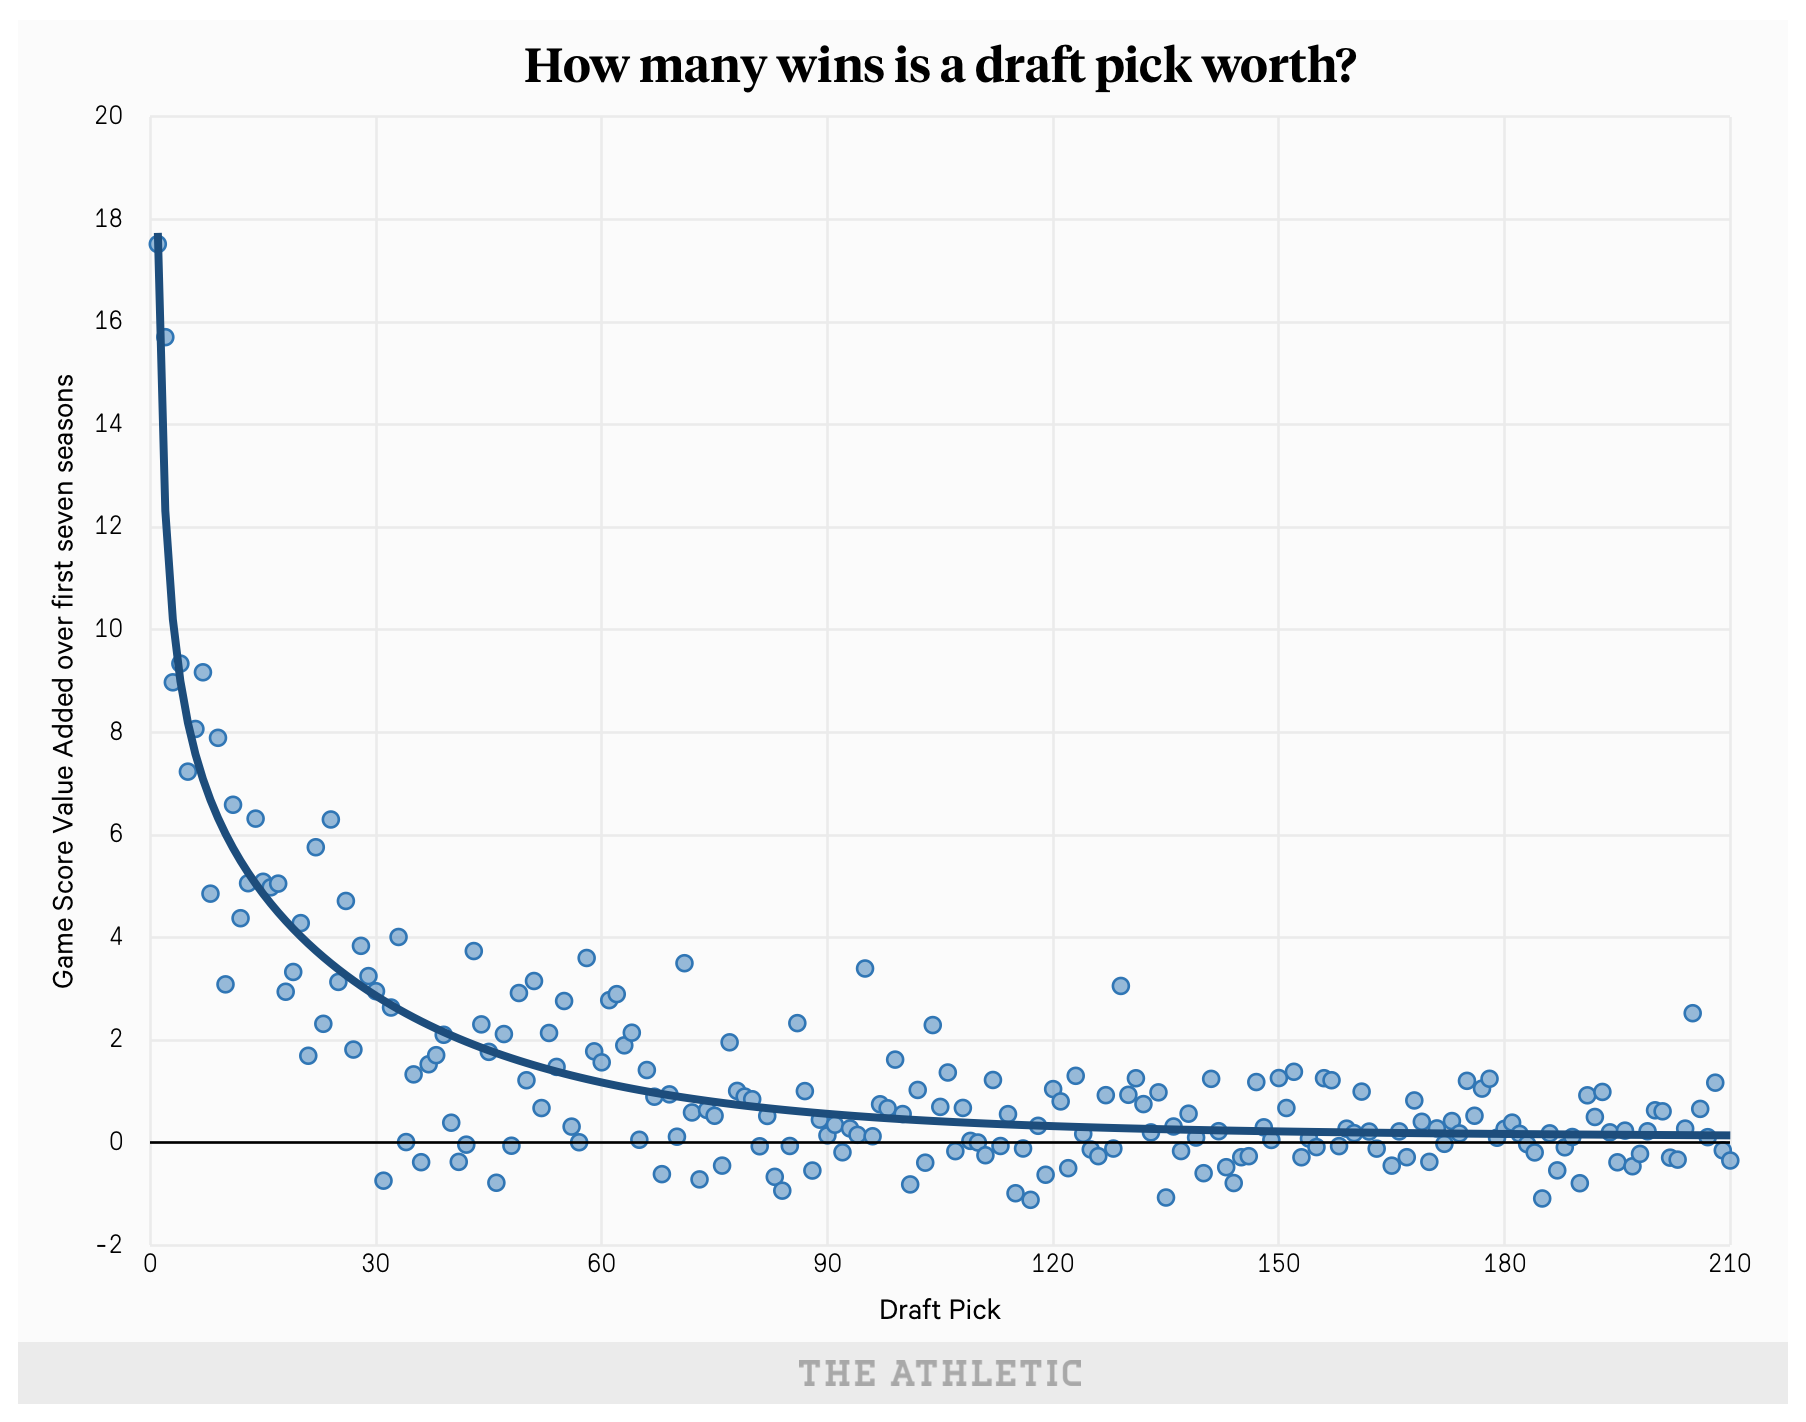 Scatterplot of players' value on the y axis versus draft pick order on the x axis. Player value is defined as game score value added over the first seven seasons. There is a steep drop off in value from the first few picks to everyone else.